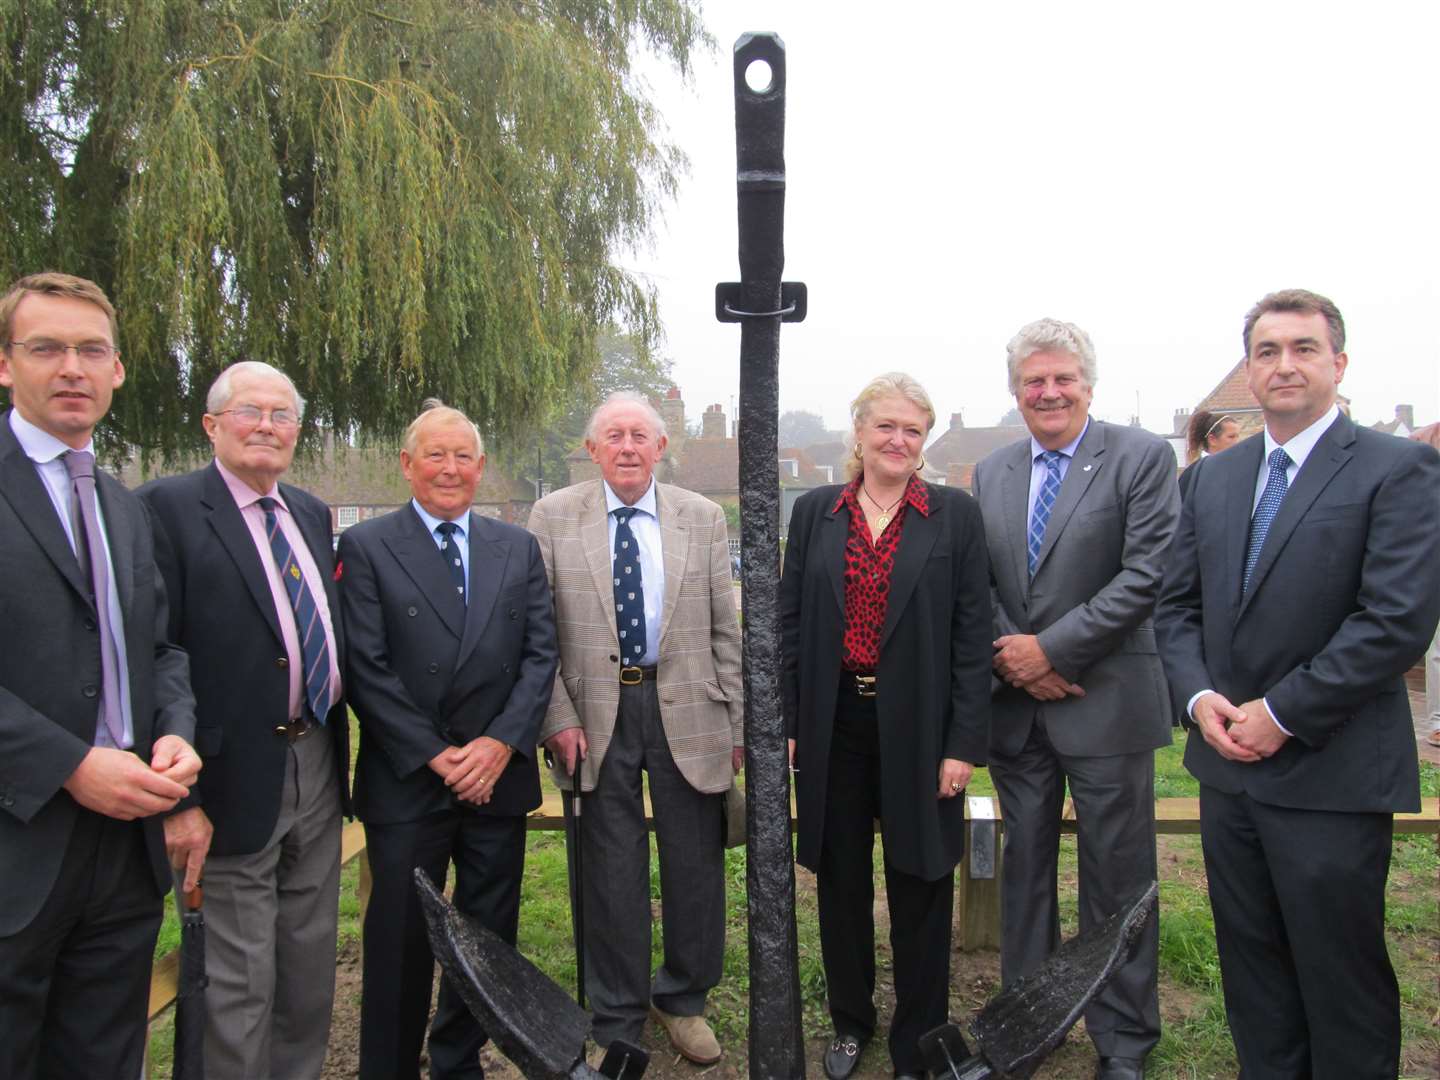 Showing off the historic anchor found by Environment Agency workers